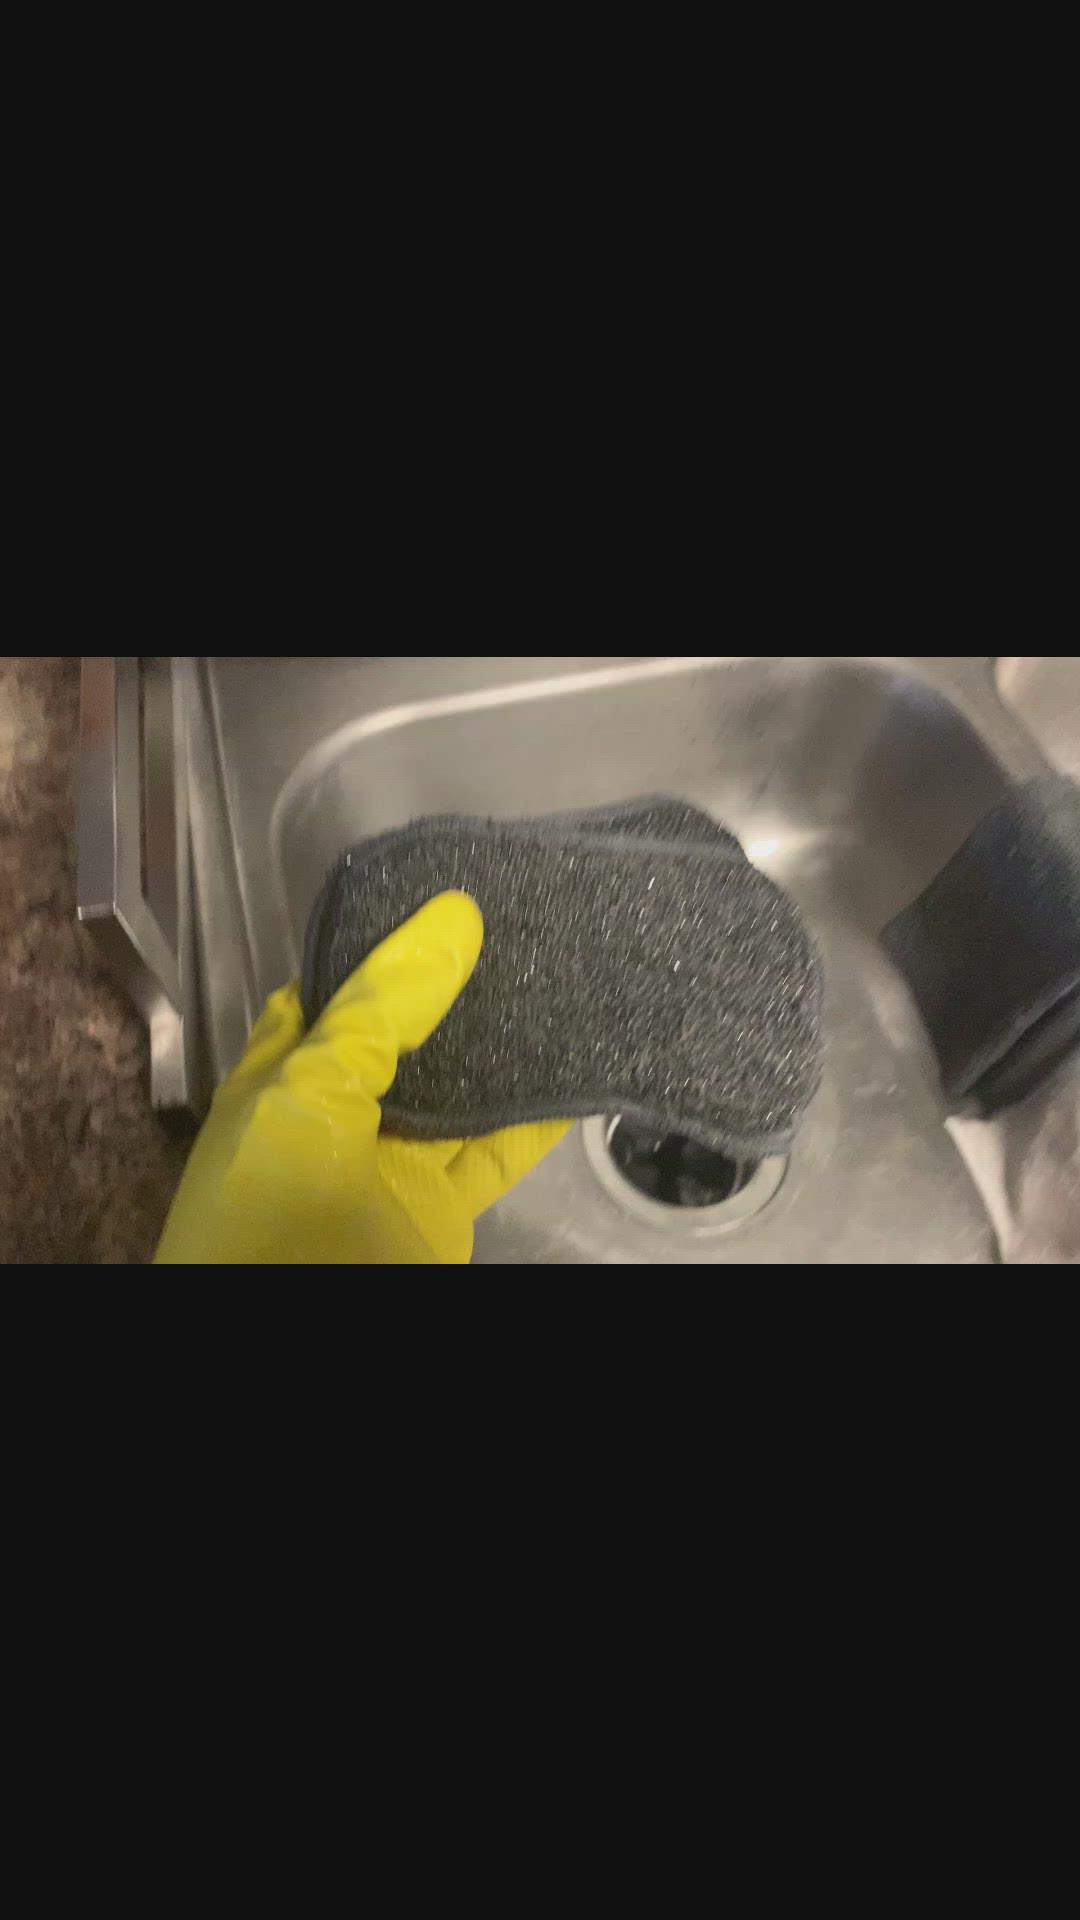 'Video thumbnail for Microwave sponge to clean it'